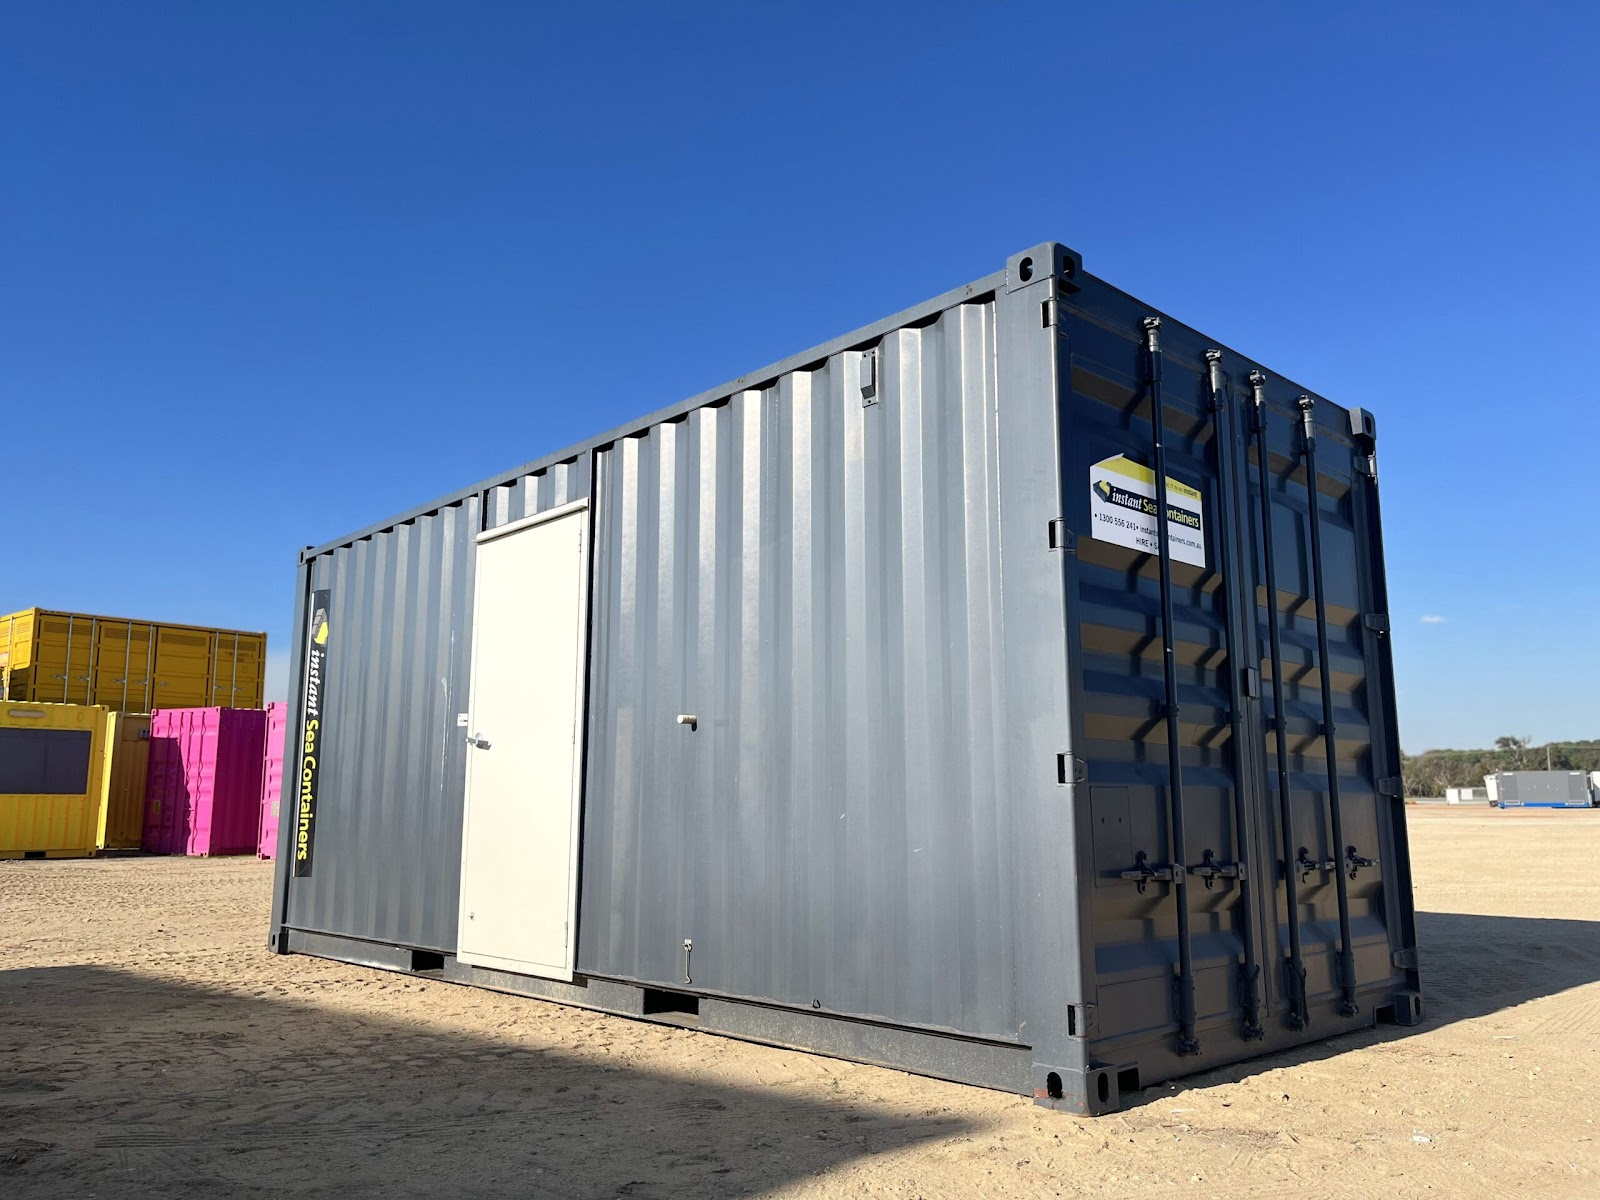 Gray shipping container with a white door, situated in an open lot with colorful containers in the background.